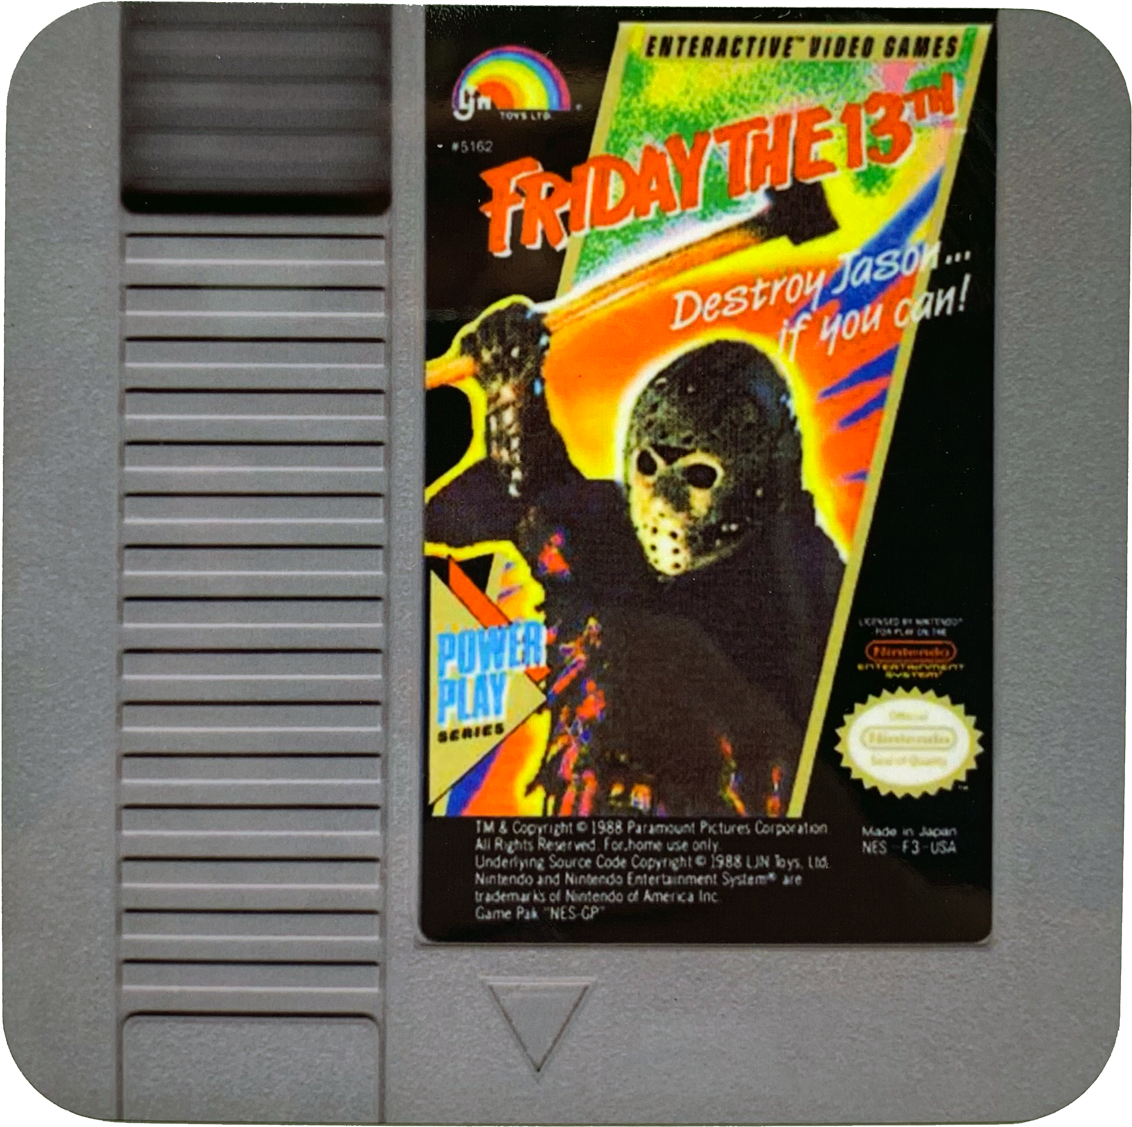 A Grey Video Game Cartridge With A Video Game Cover